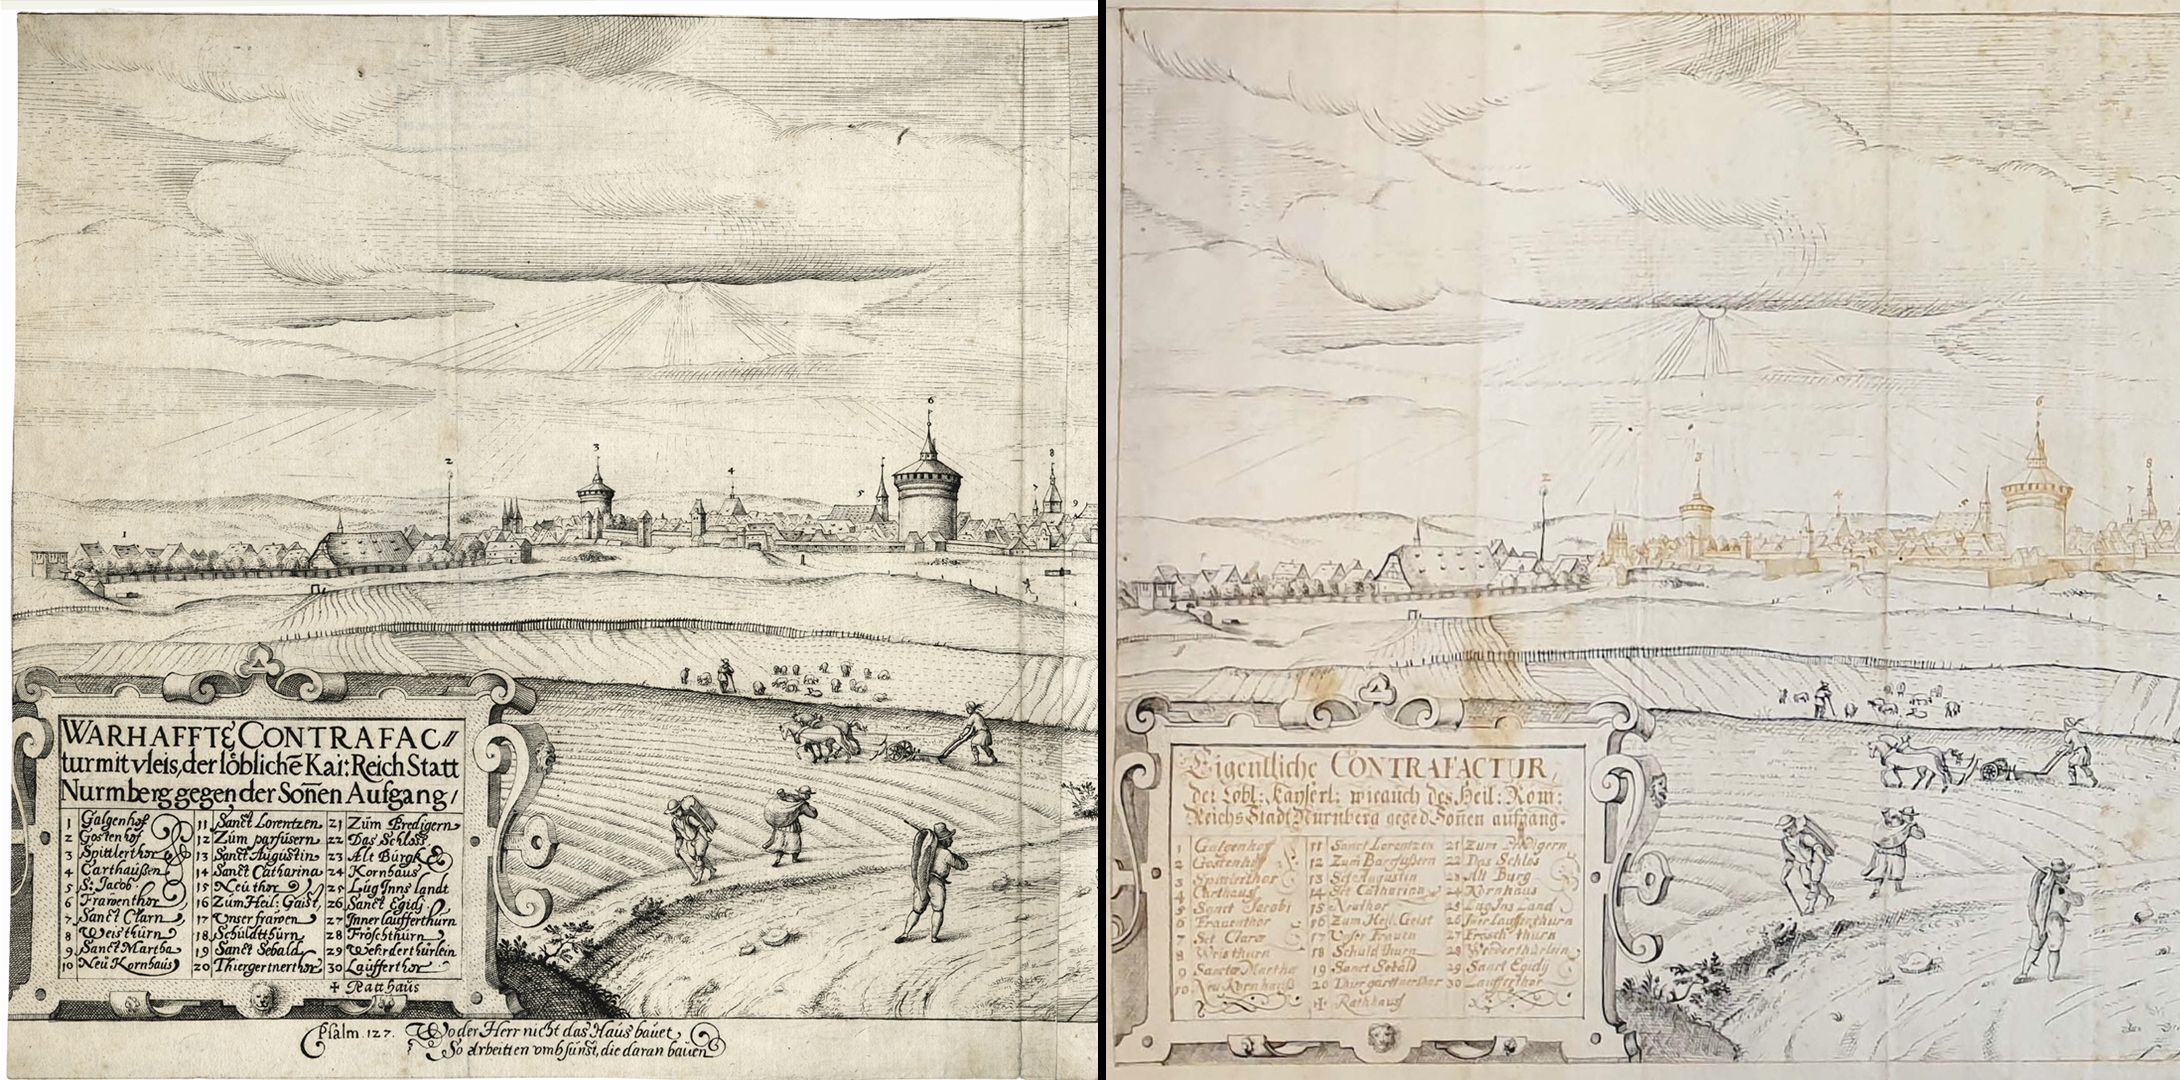 Imperial City of Nuremberg against the Rise of the Sun (east) Image comparison: left copperplate engraving by Wechter, right pen and ink drawing by Kaulitz